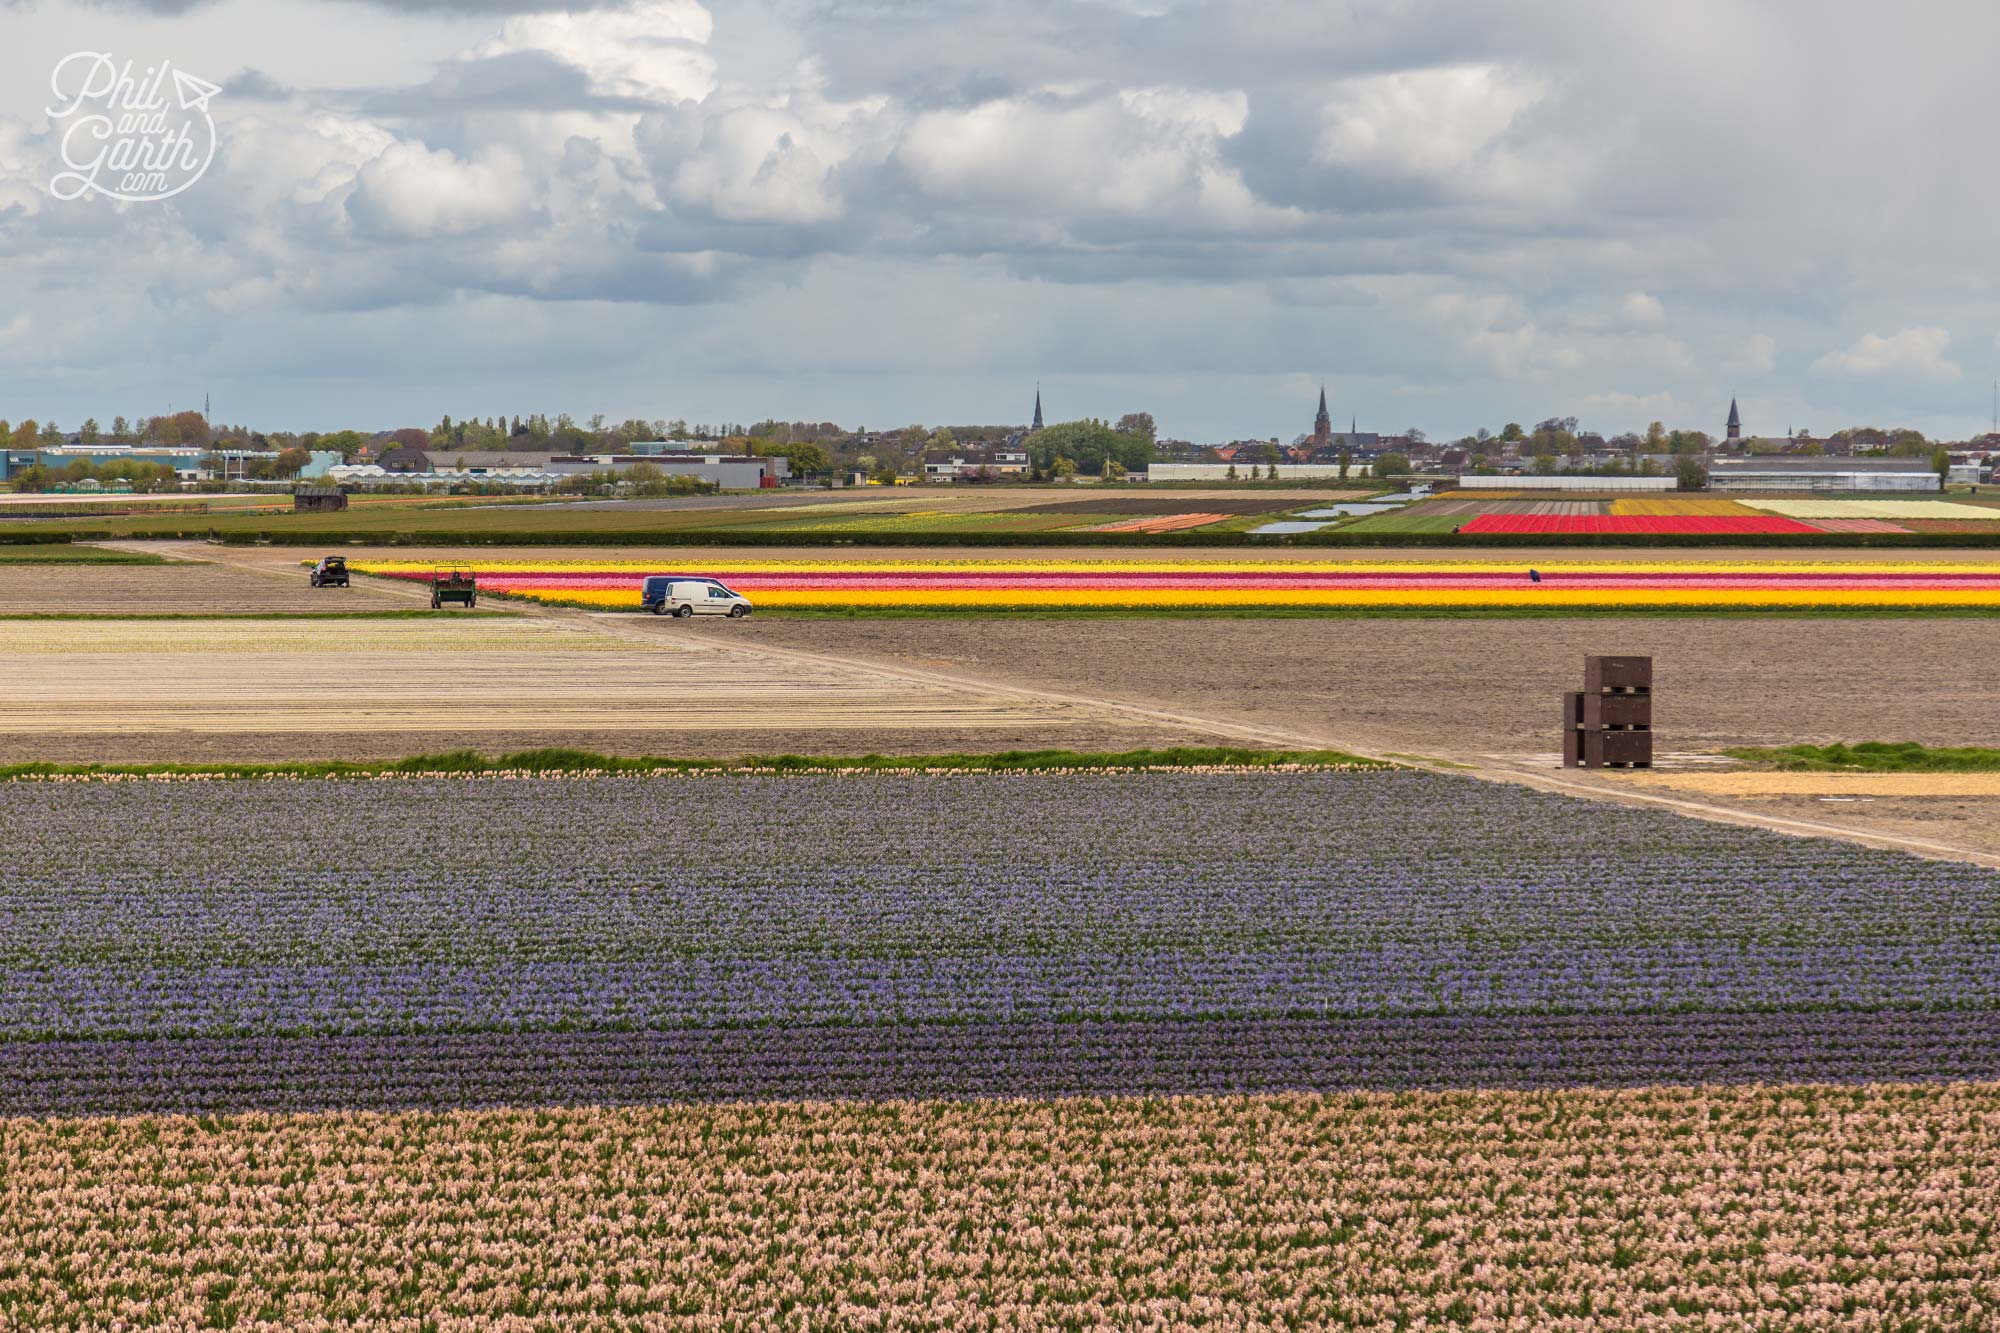 View of the flower and tulip fields from the top of the Keukenhof windmill